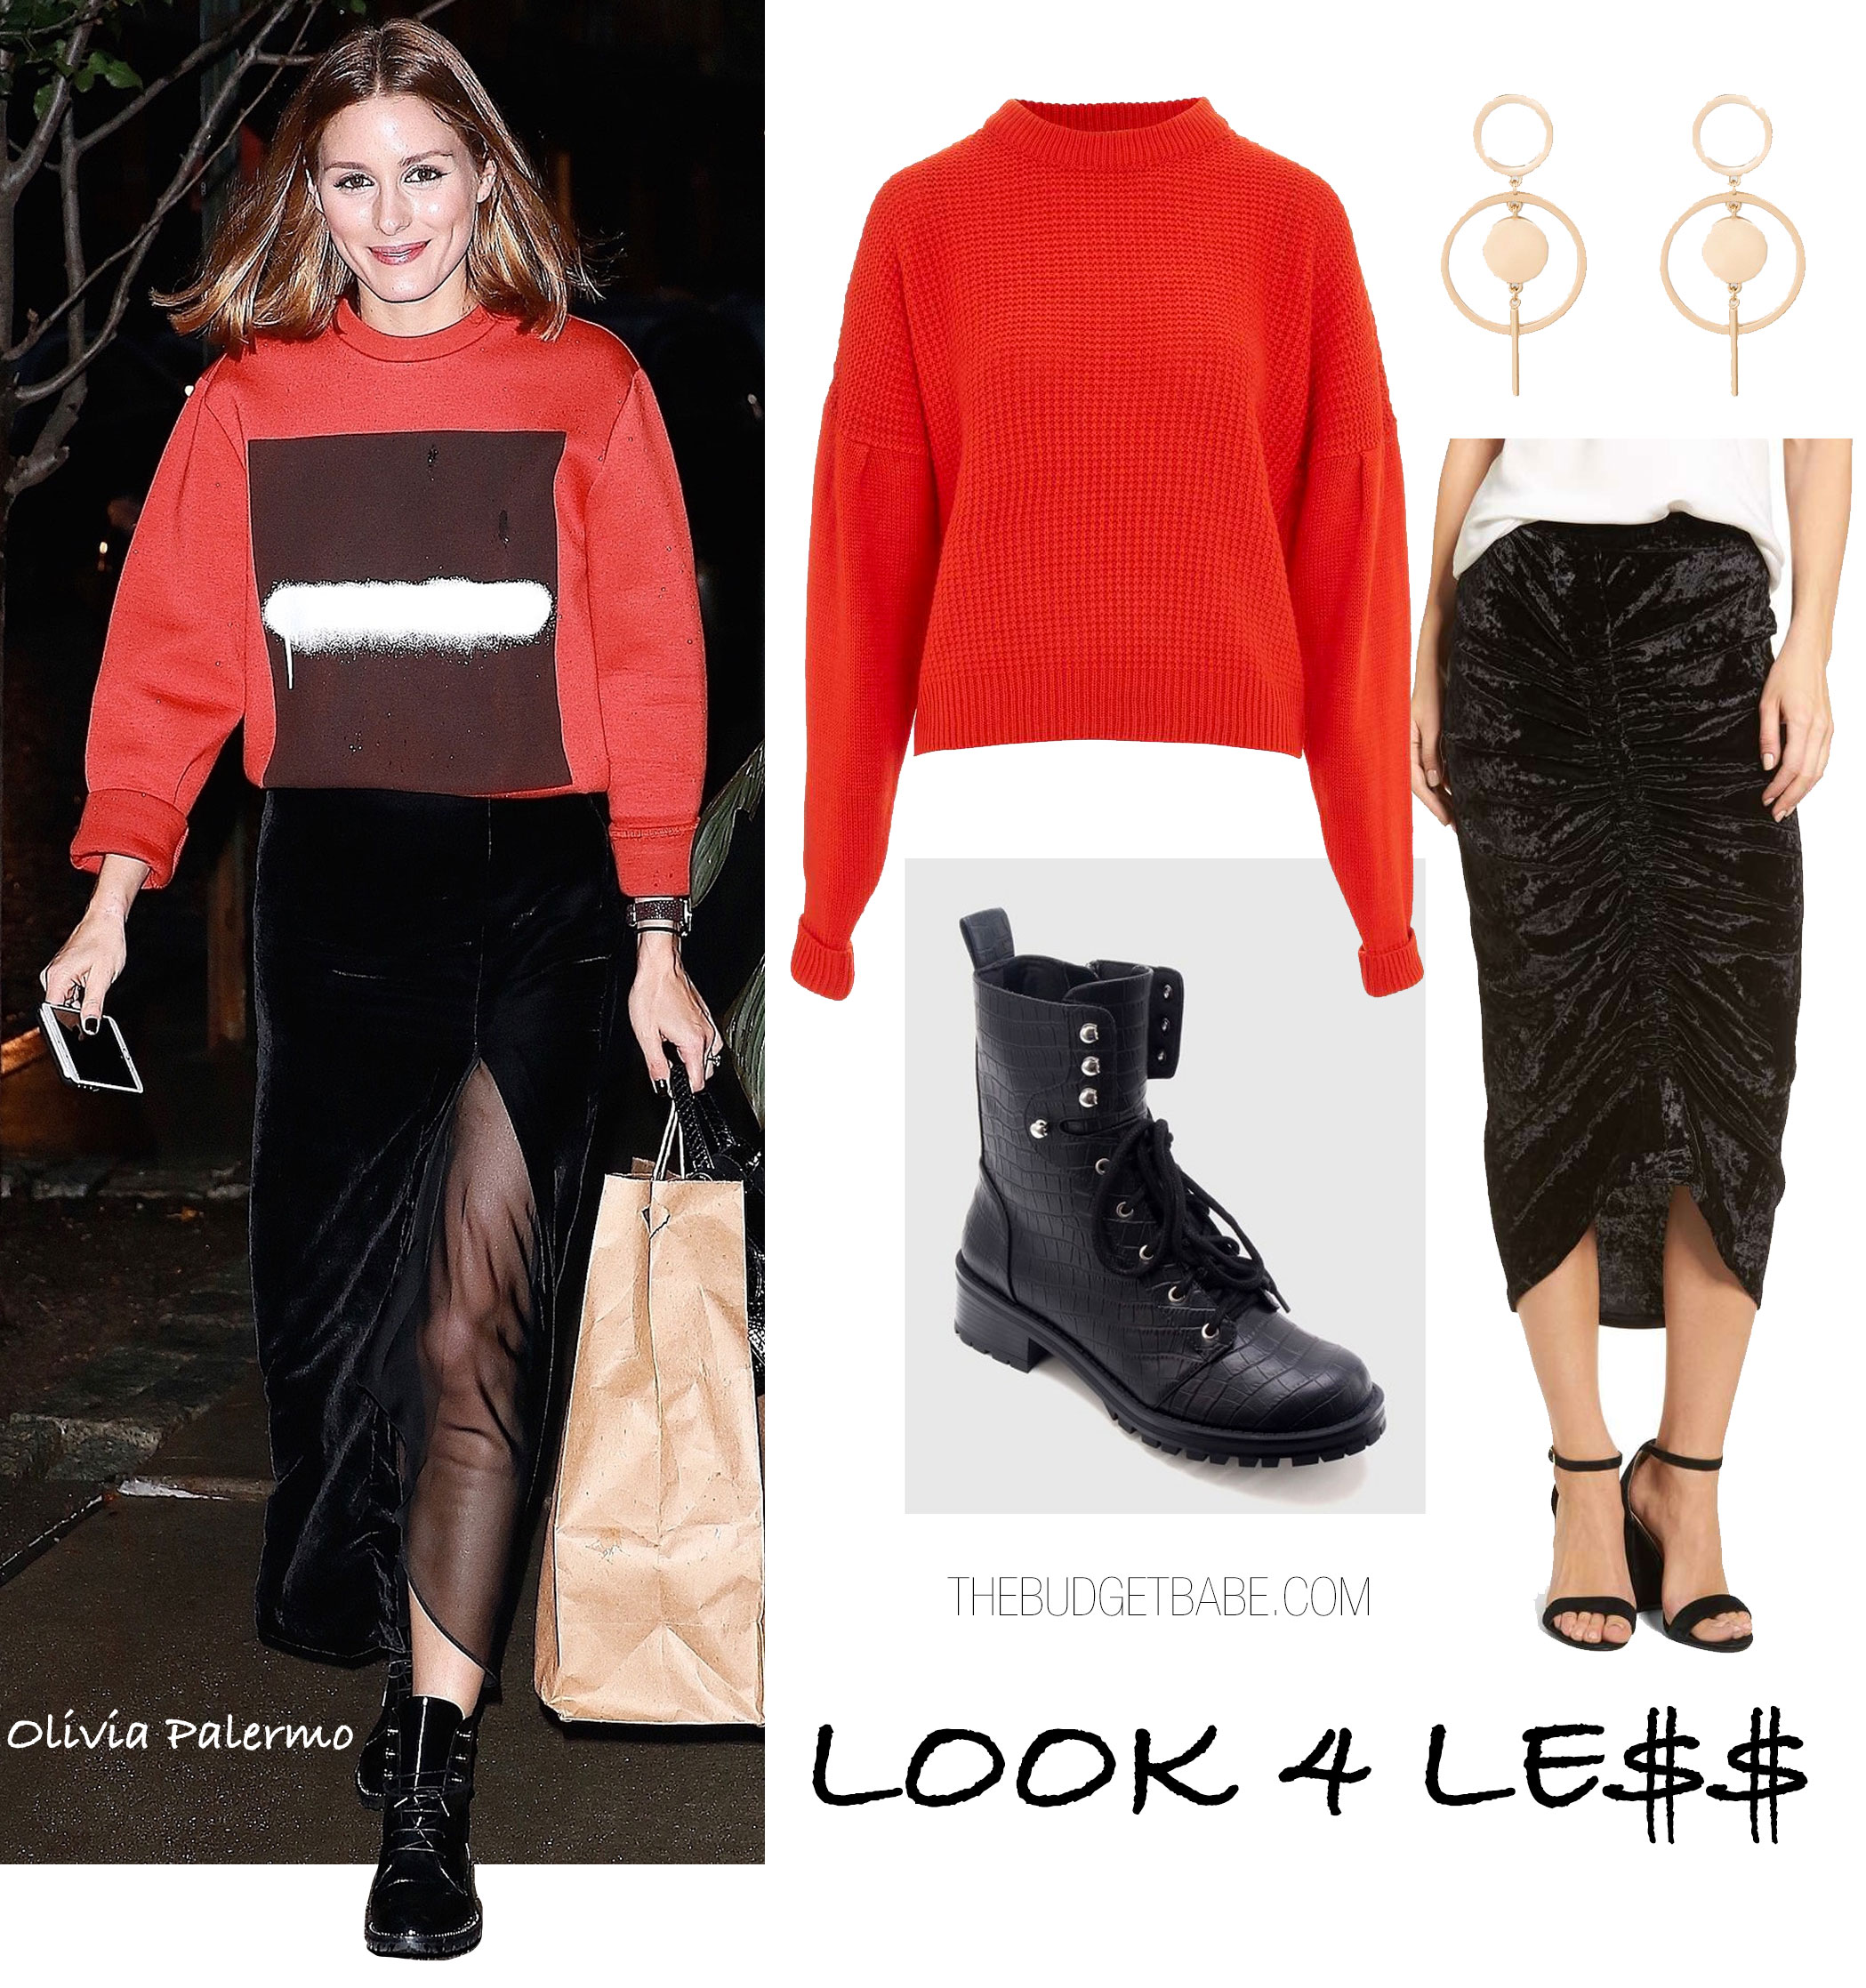 For an unconventional holiday party look, try a velvet midi skirt, chunky red sweater and combat boots like Olivia Palermo.